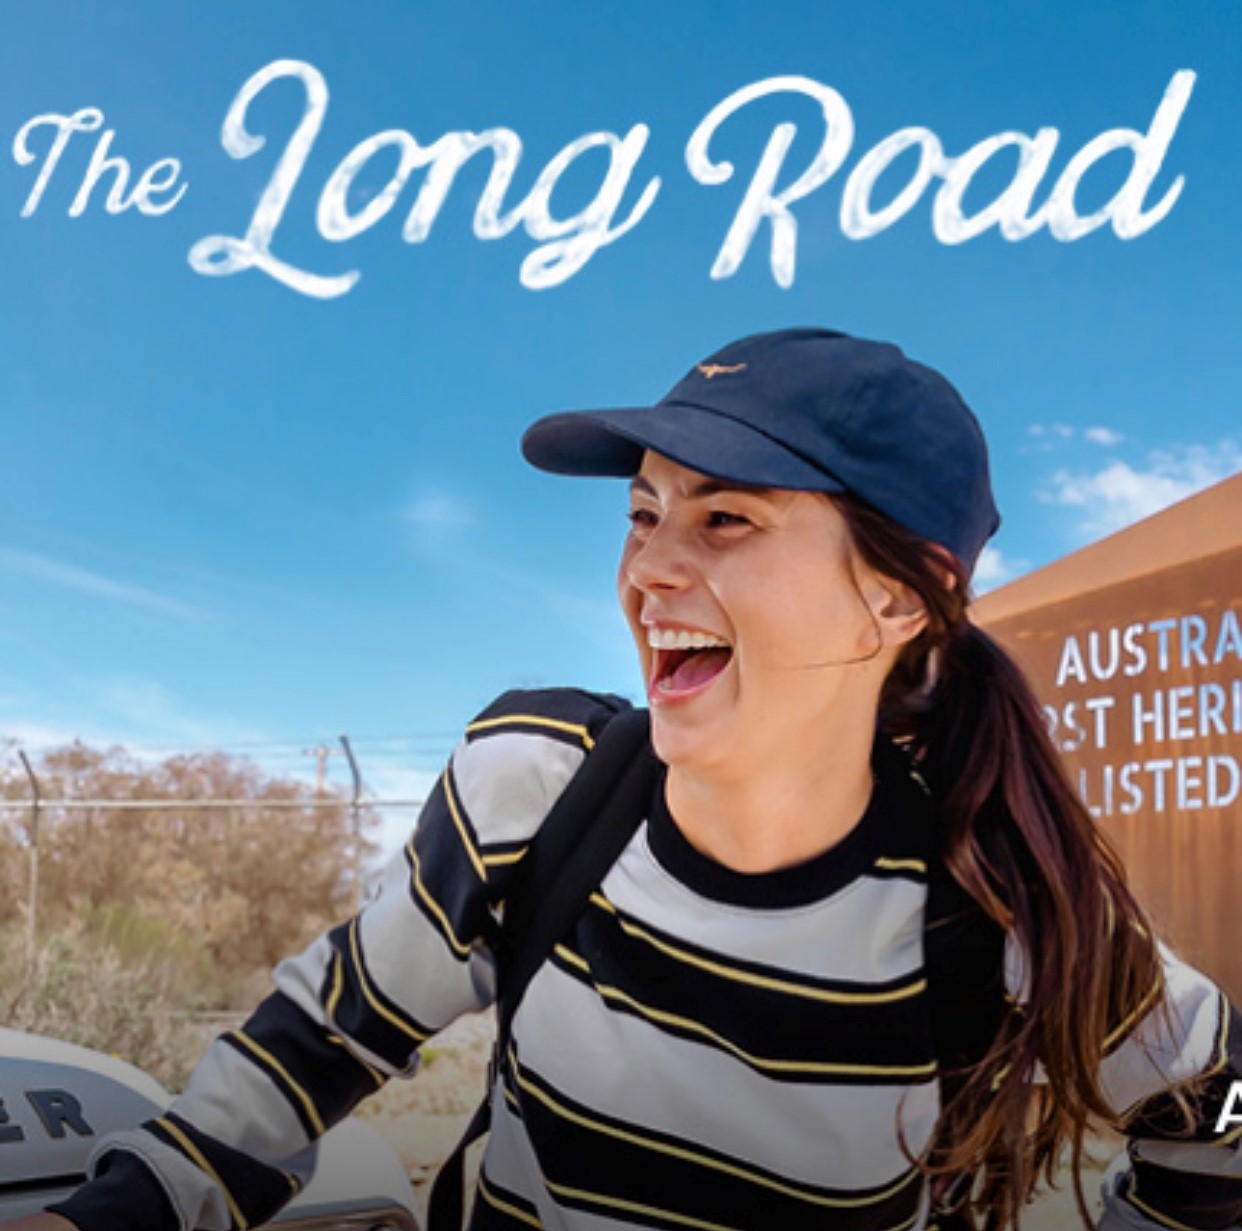 THE LAUNCH OF THE LONG ROAD